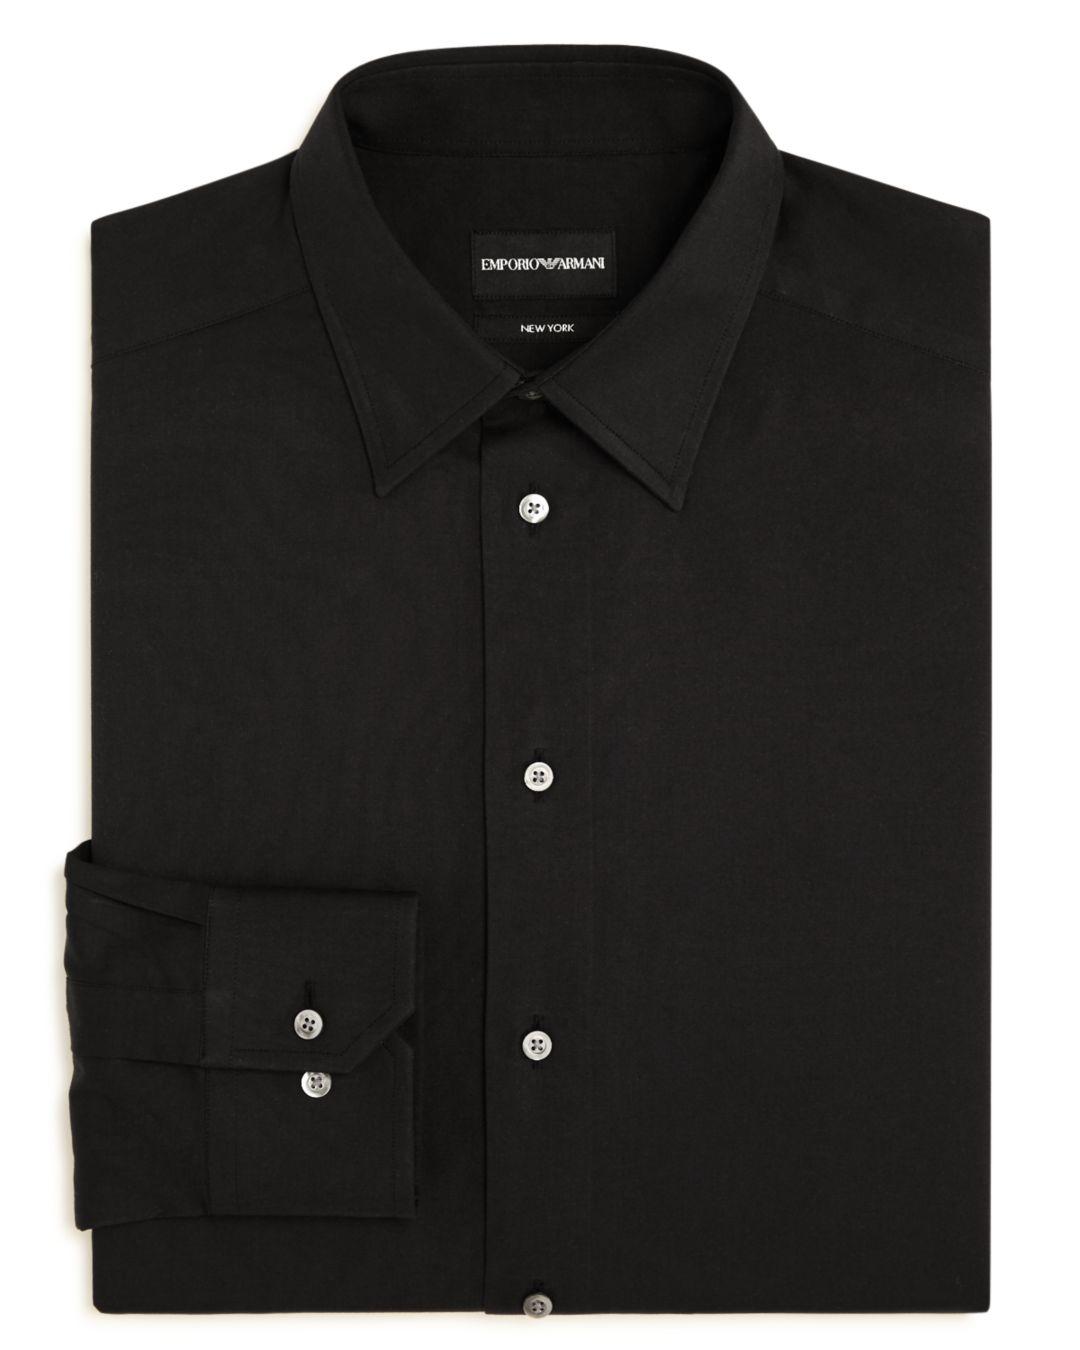 Armani Cotton Emporio Solid Regular Fit Dress Shirt in Black for Men - Lyst